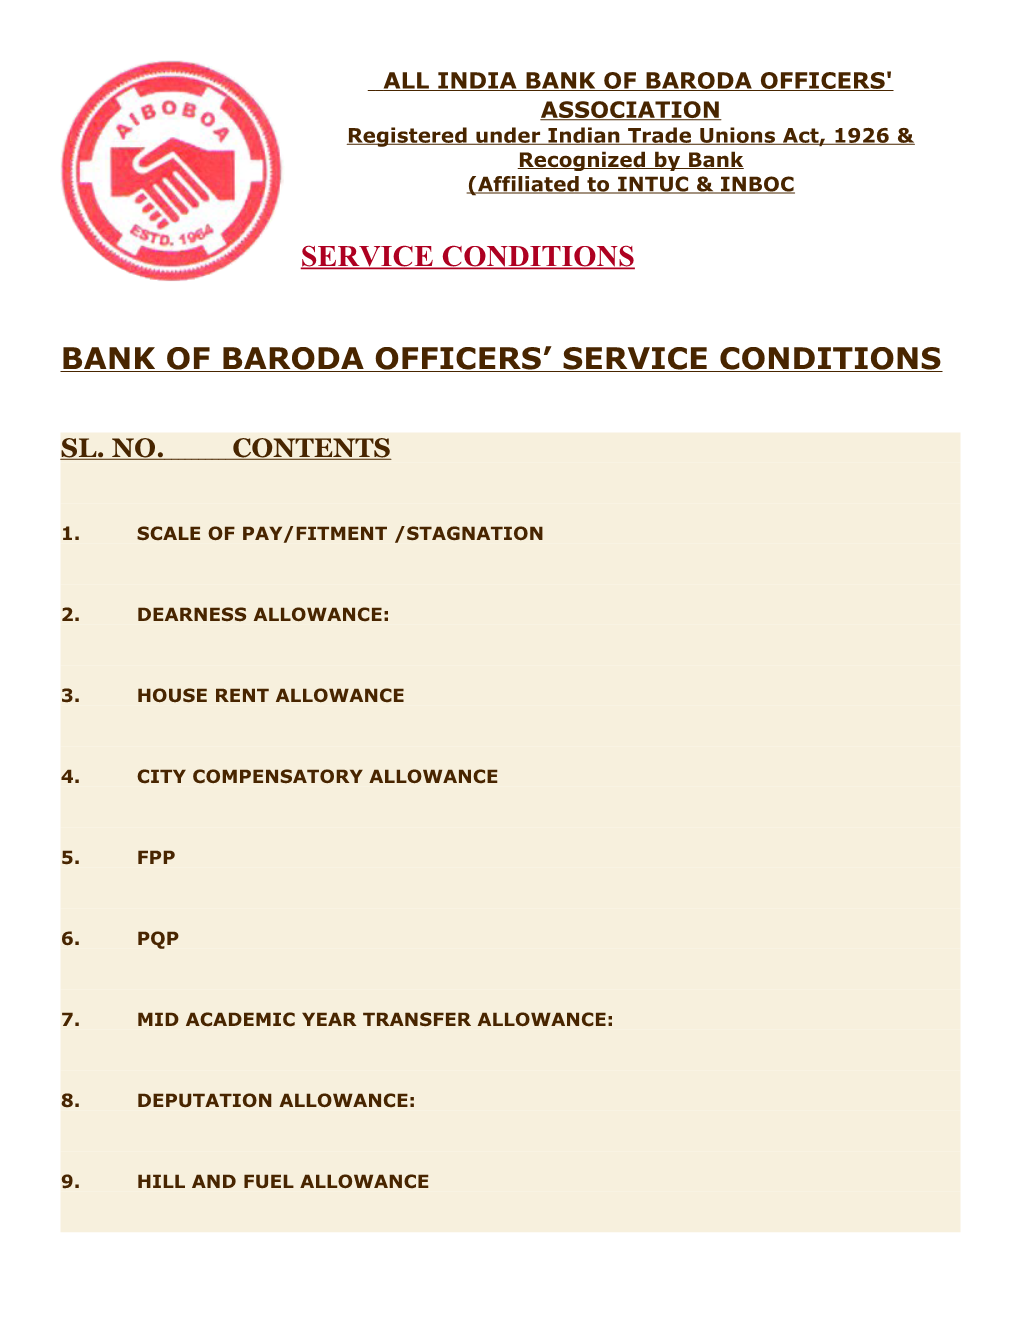 Bank of Baroda Officers Service Conditions